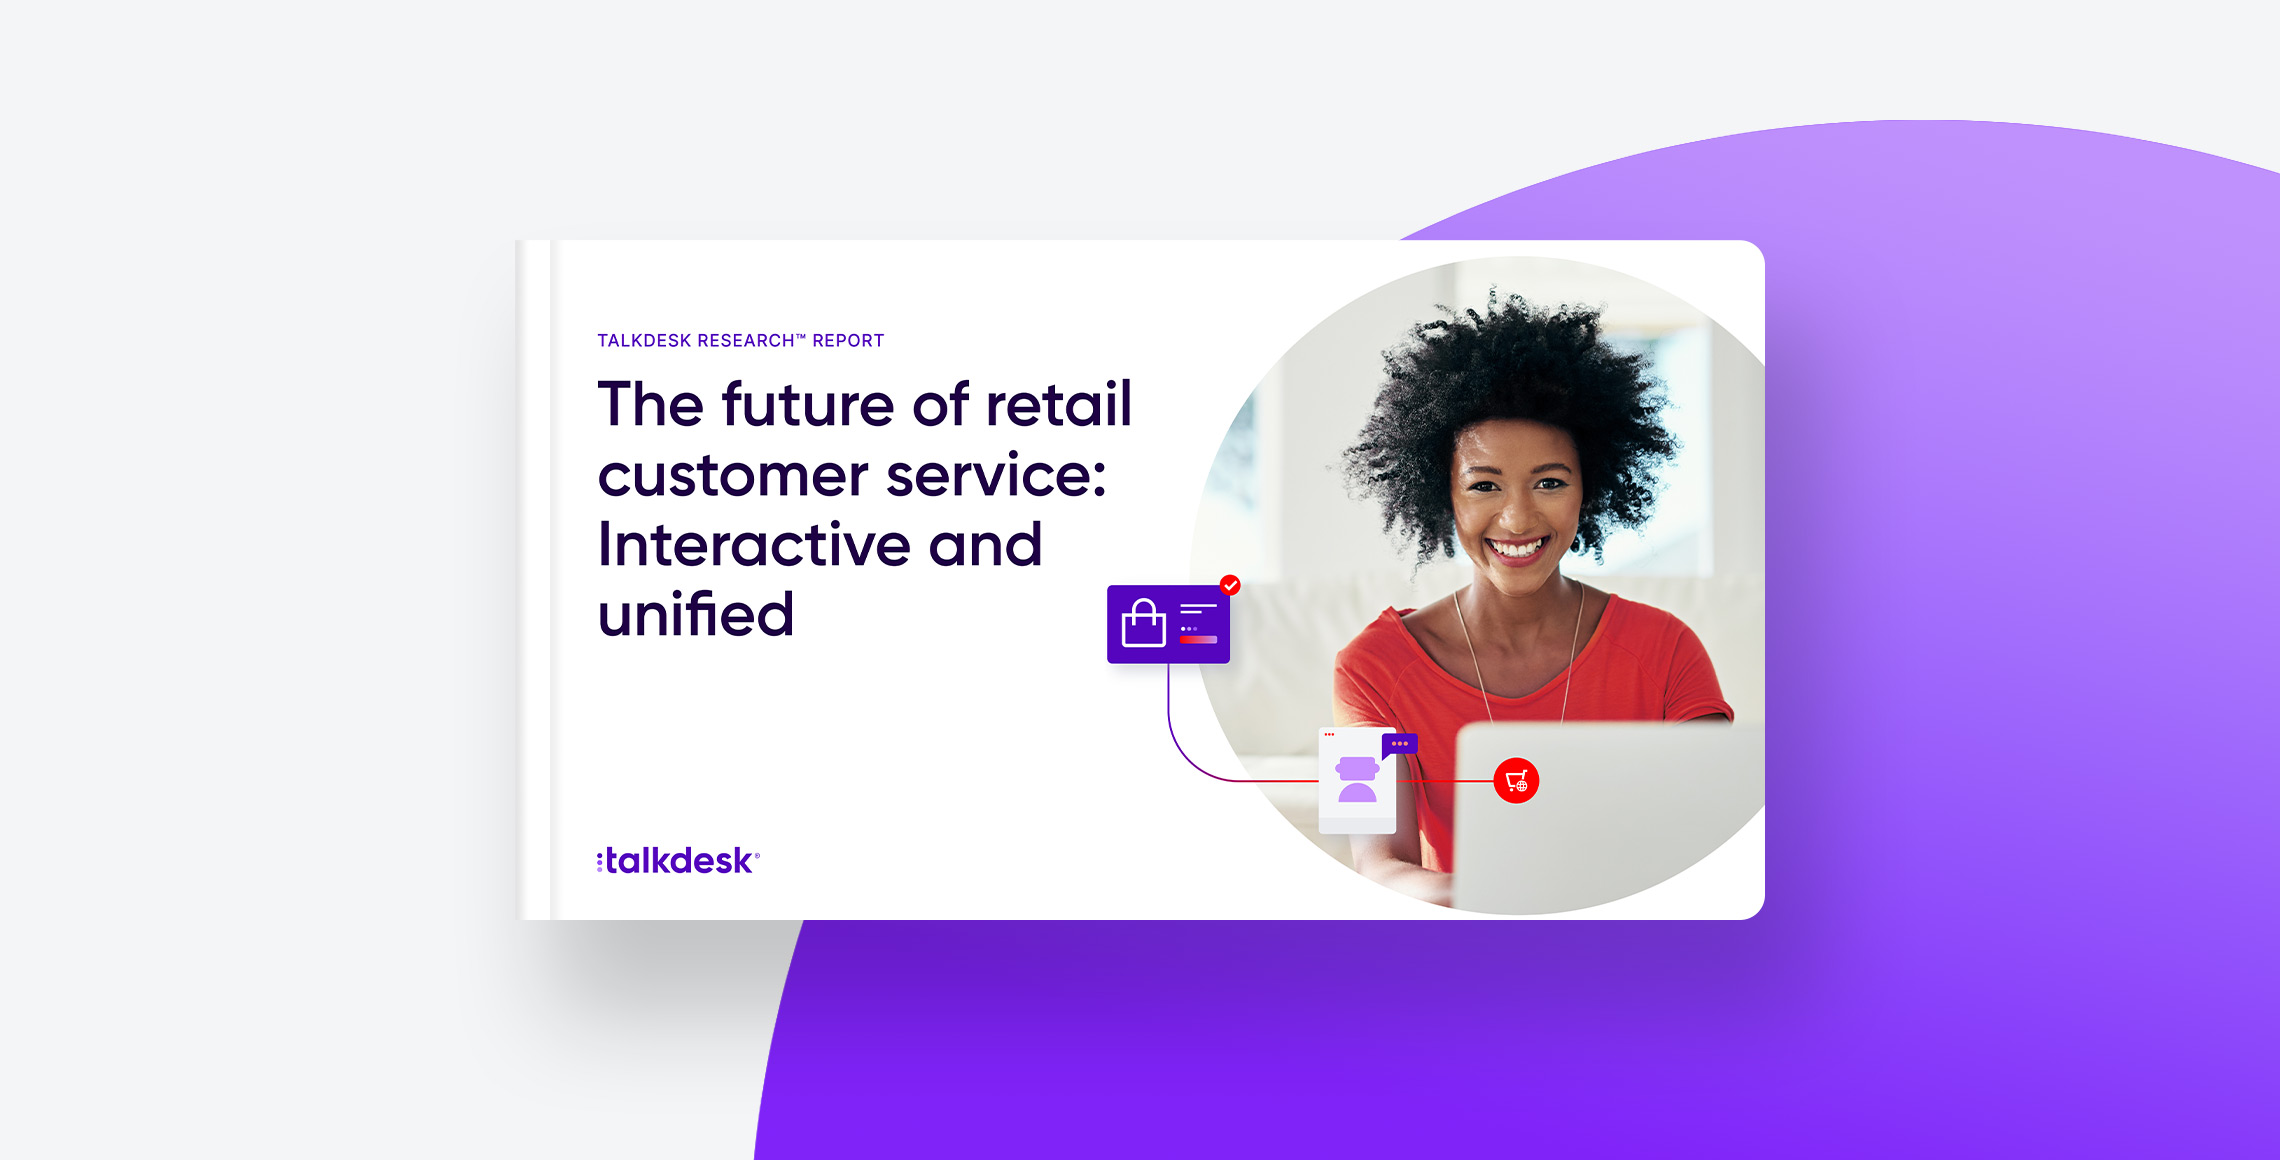 What Will the Retail Experience of the Future Look Like?